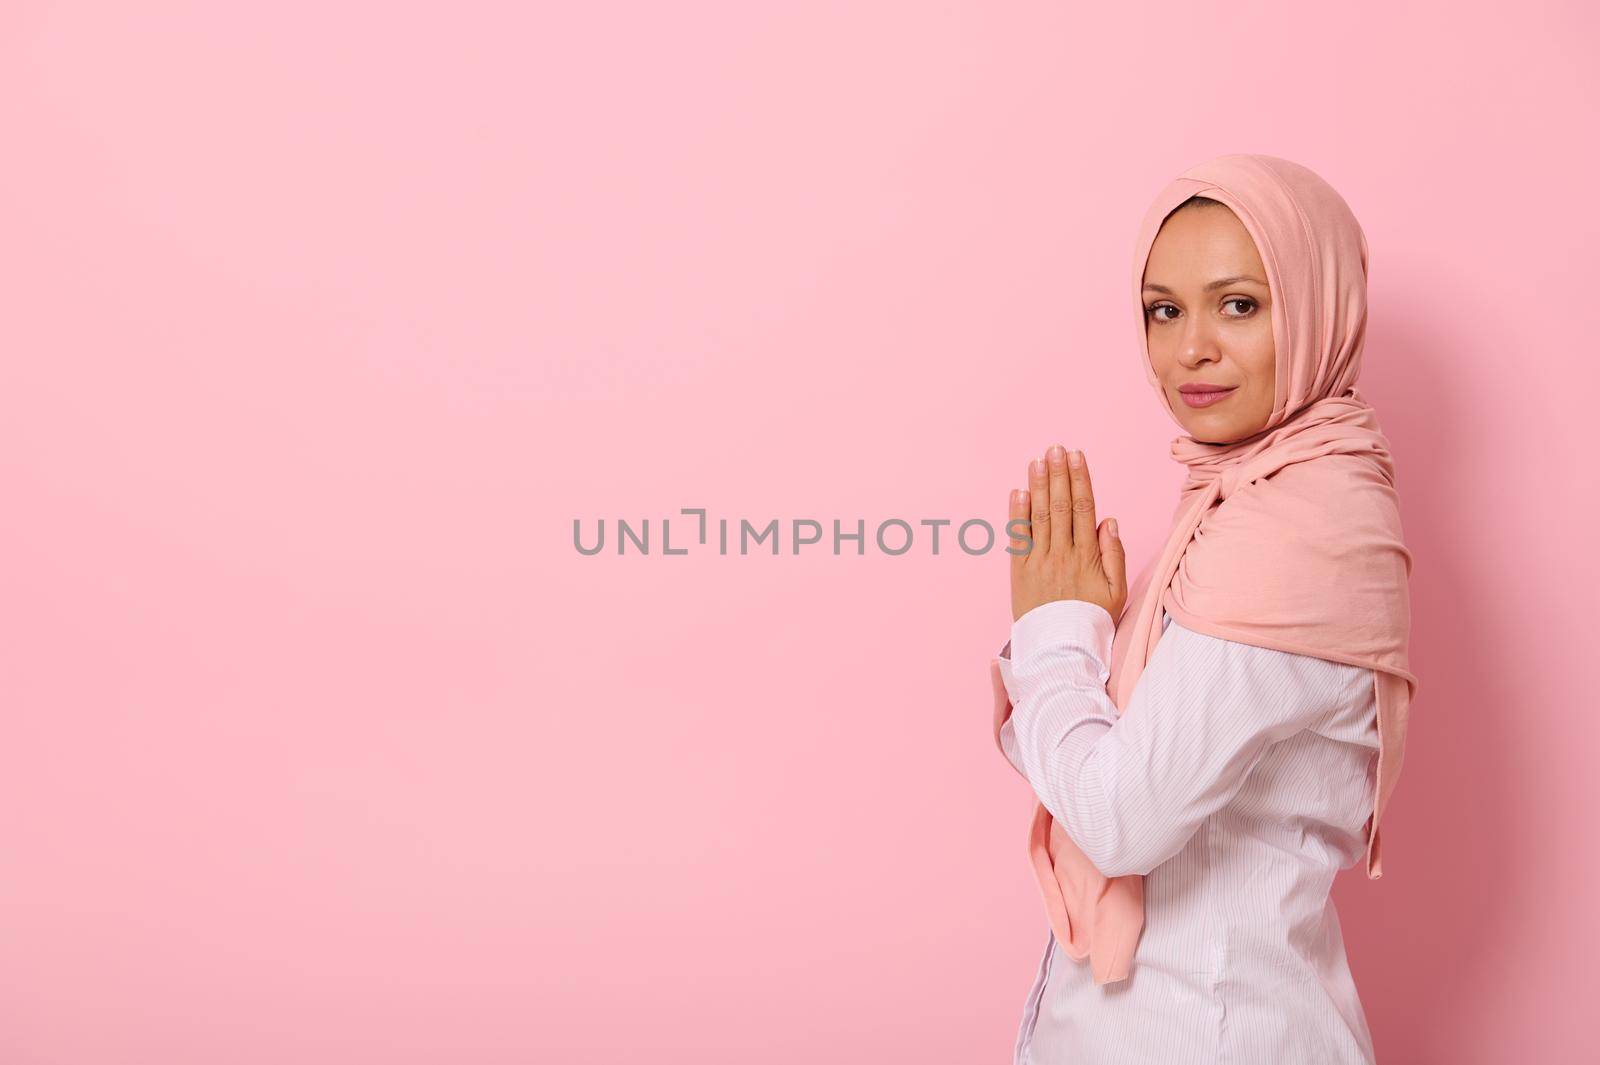 Muslim Arab woman in pink hijab and strict outfit with palms folded together at chest level praying, performing namaz, looking confidently at camera, isolated on colored background with space for text by artgf